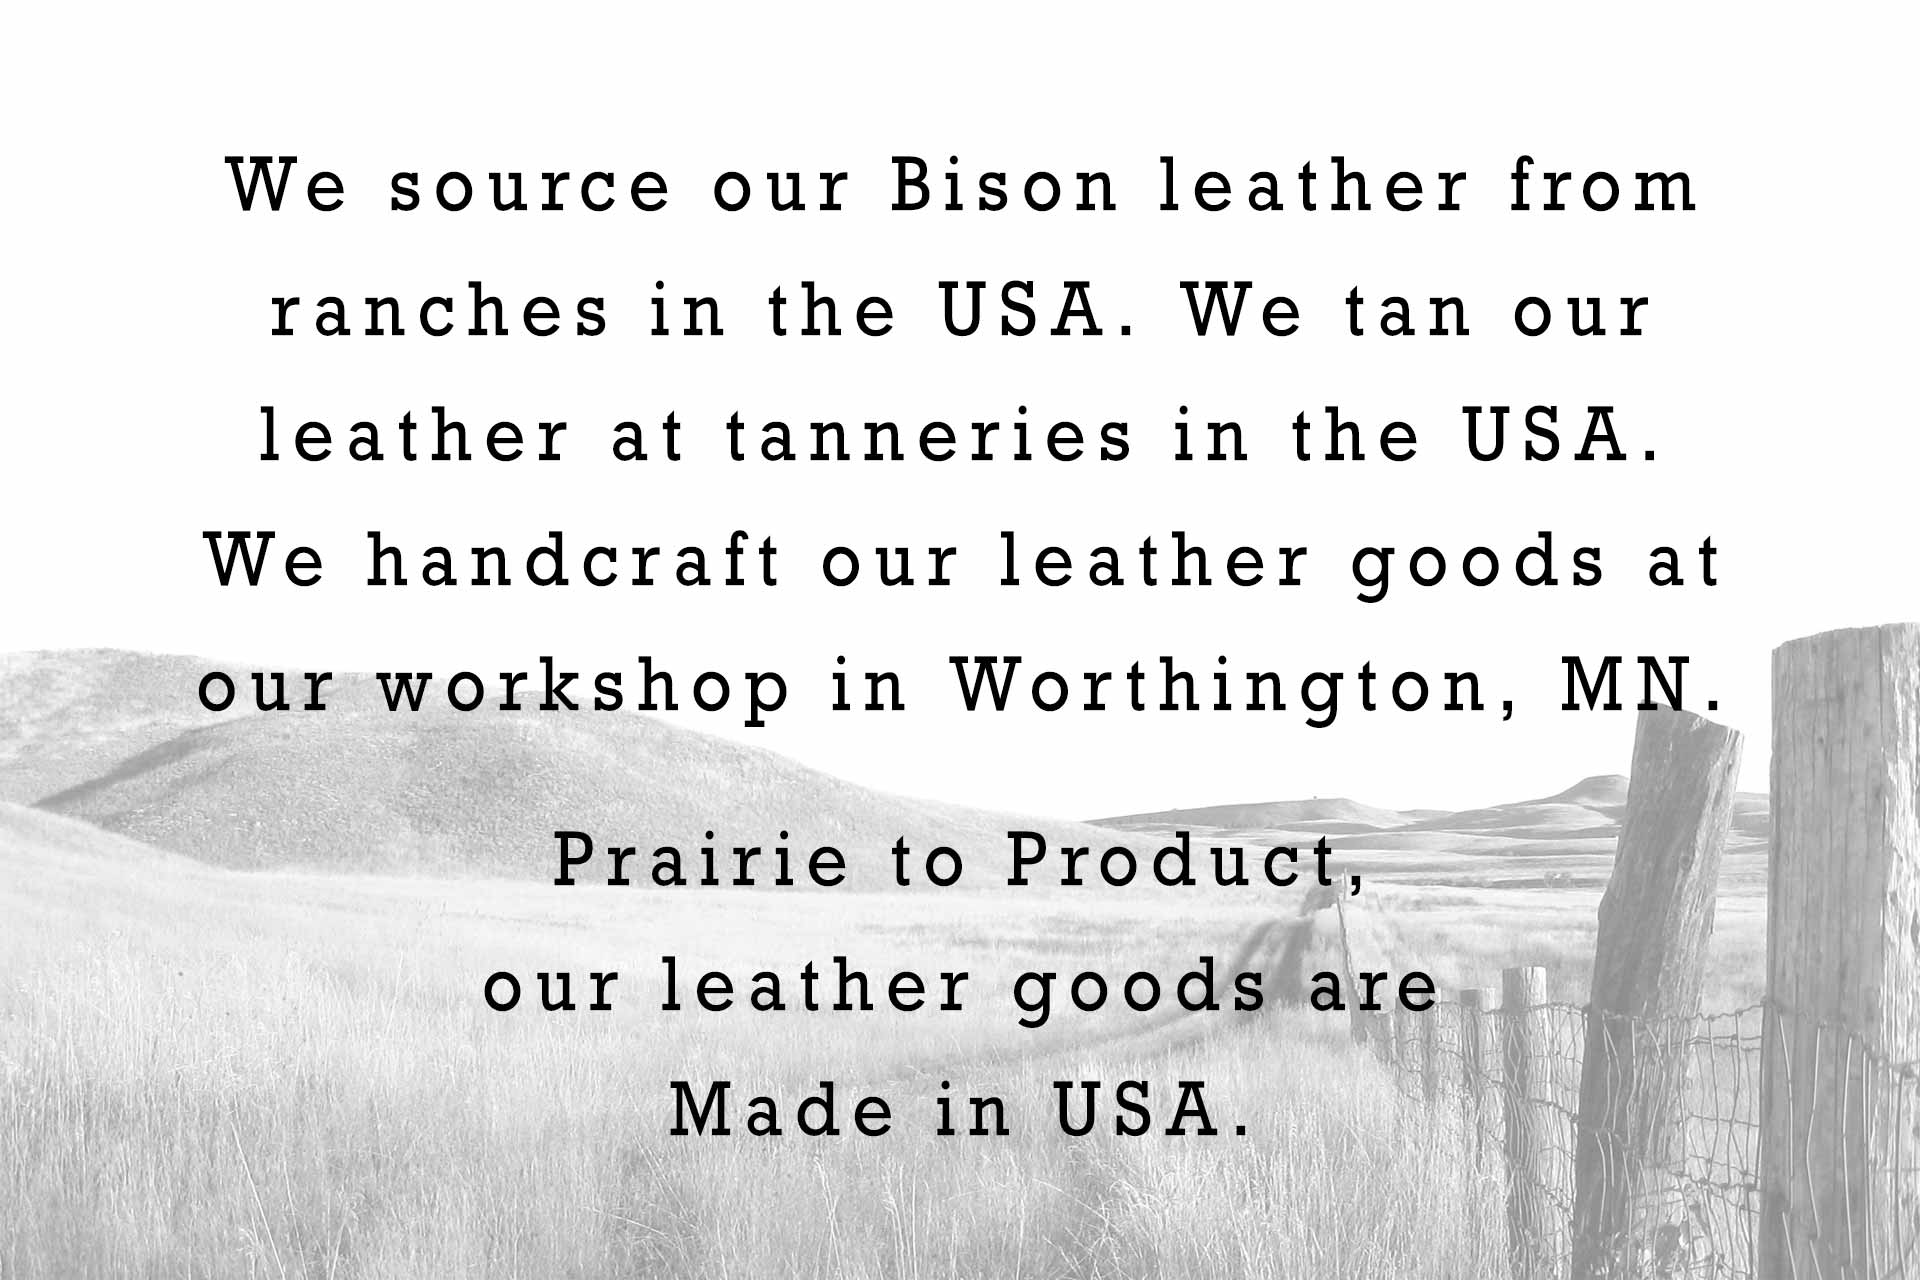 Prairie to Product, our leather goods are Made in USA.